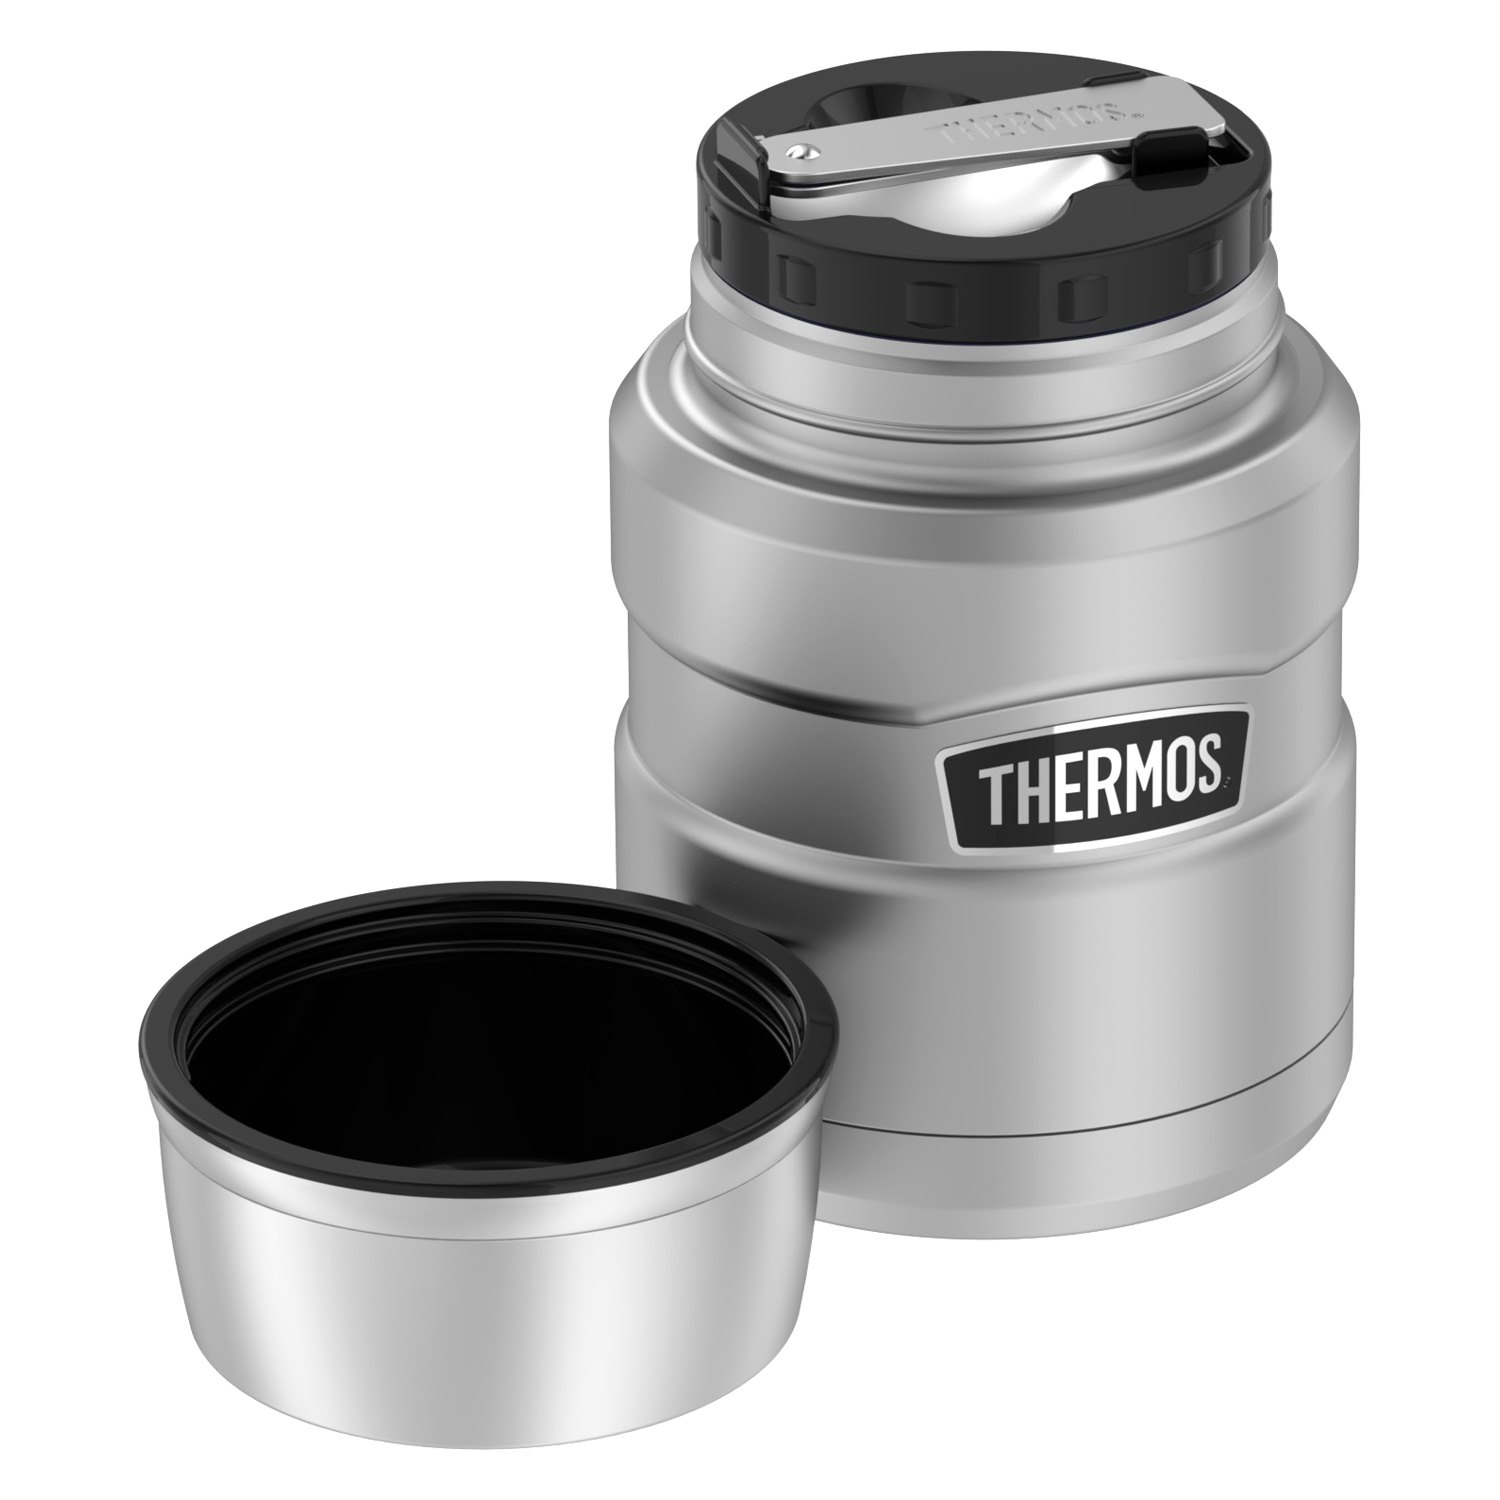 https://images.recreationid.com/thermos/items/sk3000mstri4-7.jpg